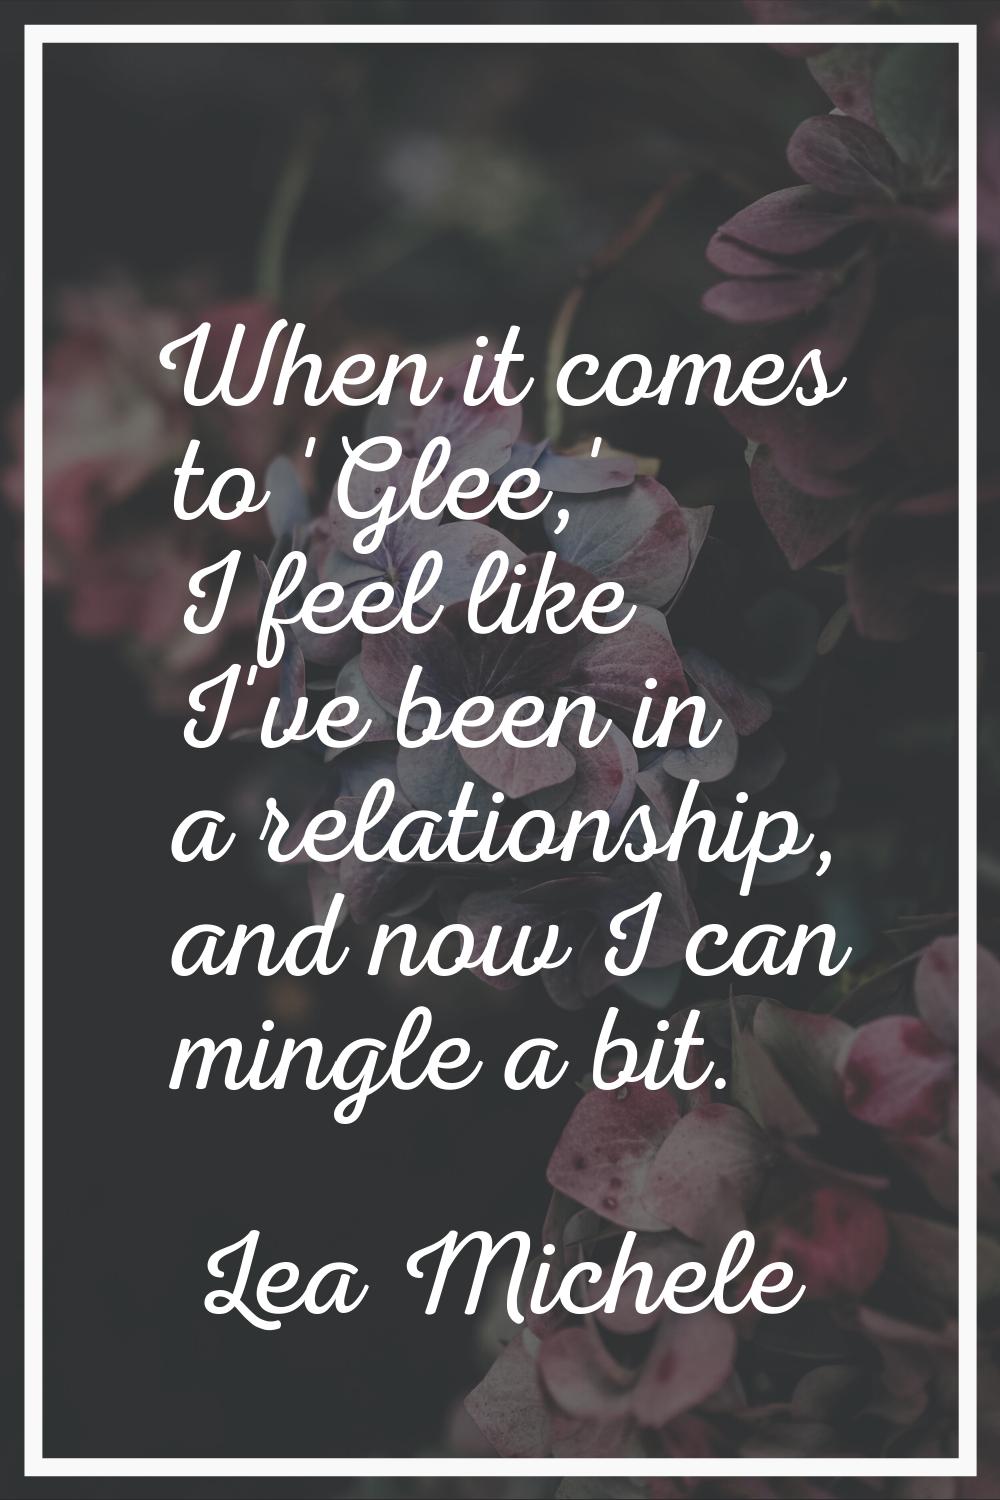 When it comes to 'Glee,' I feel like I've been in a relationship, and now I can mingle a bit.